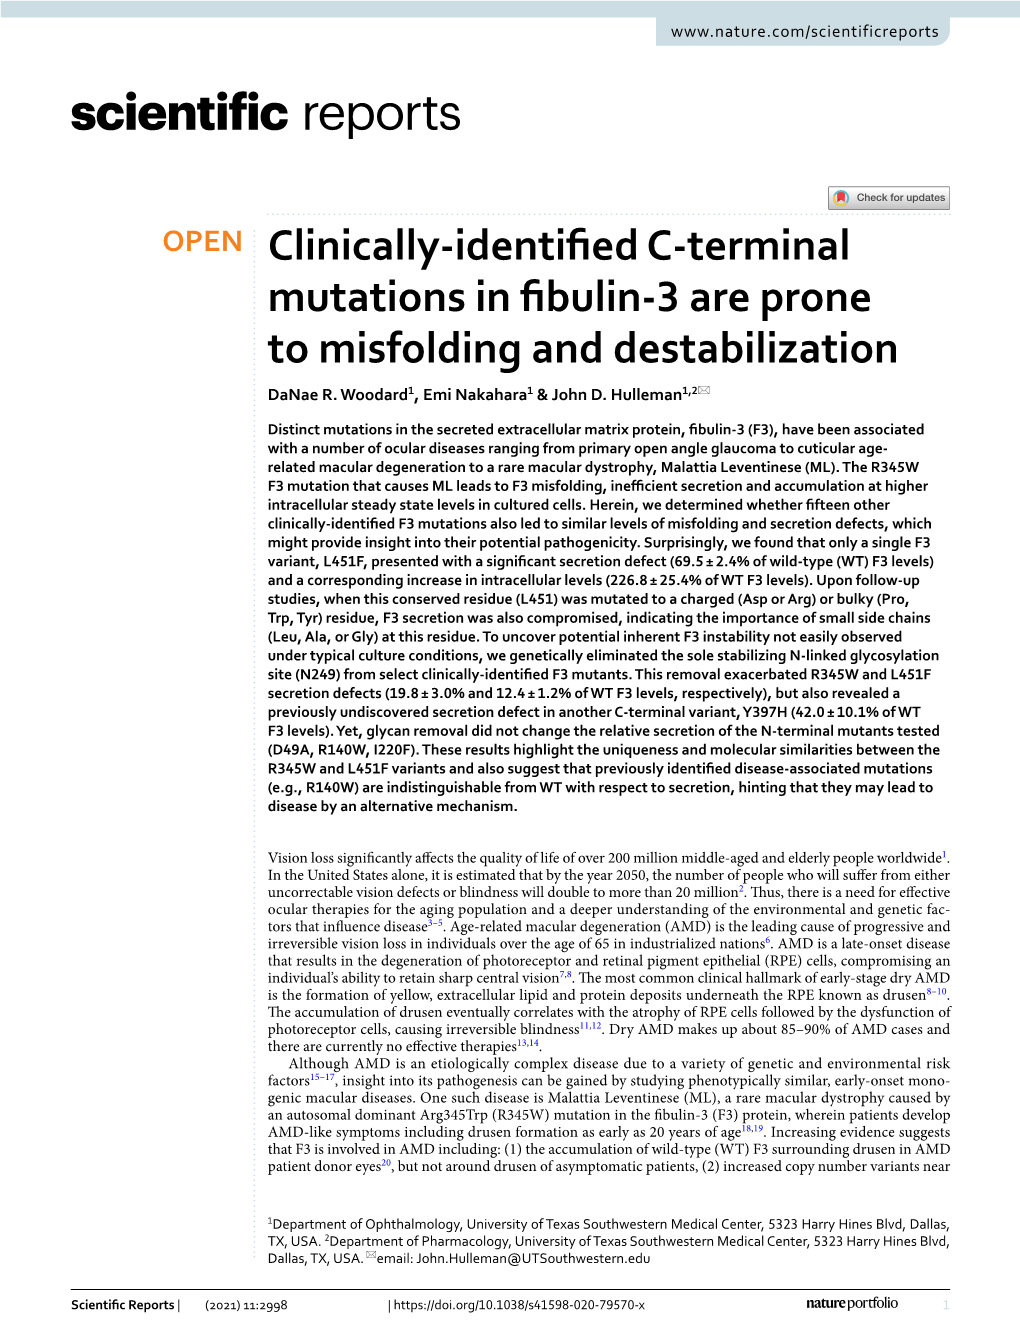 Clinically-Identified C-Terminal Mutations in Fibulin-3 Are Prone to Misfolding and Destabilization